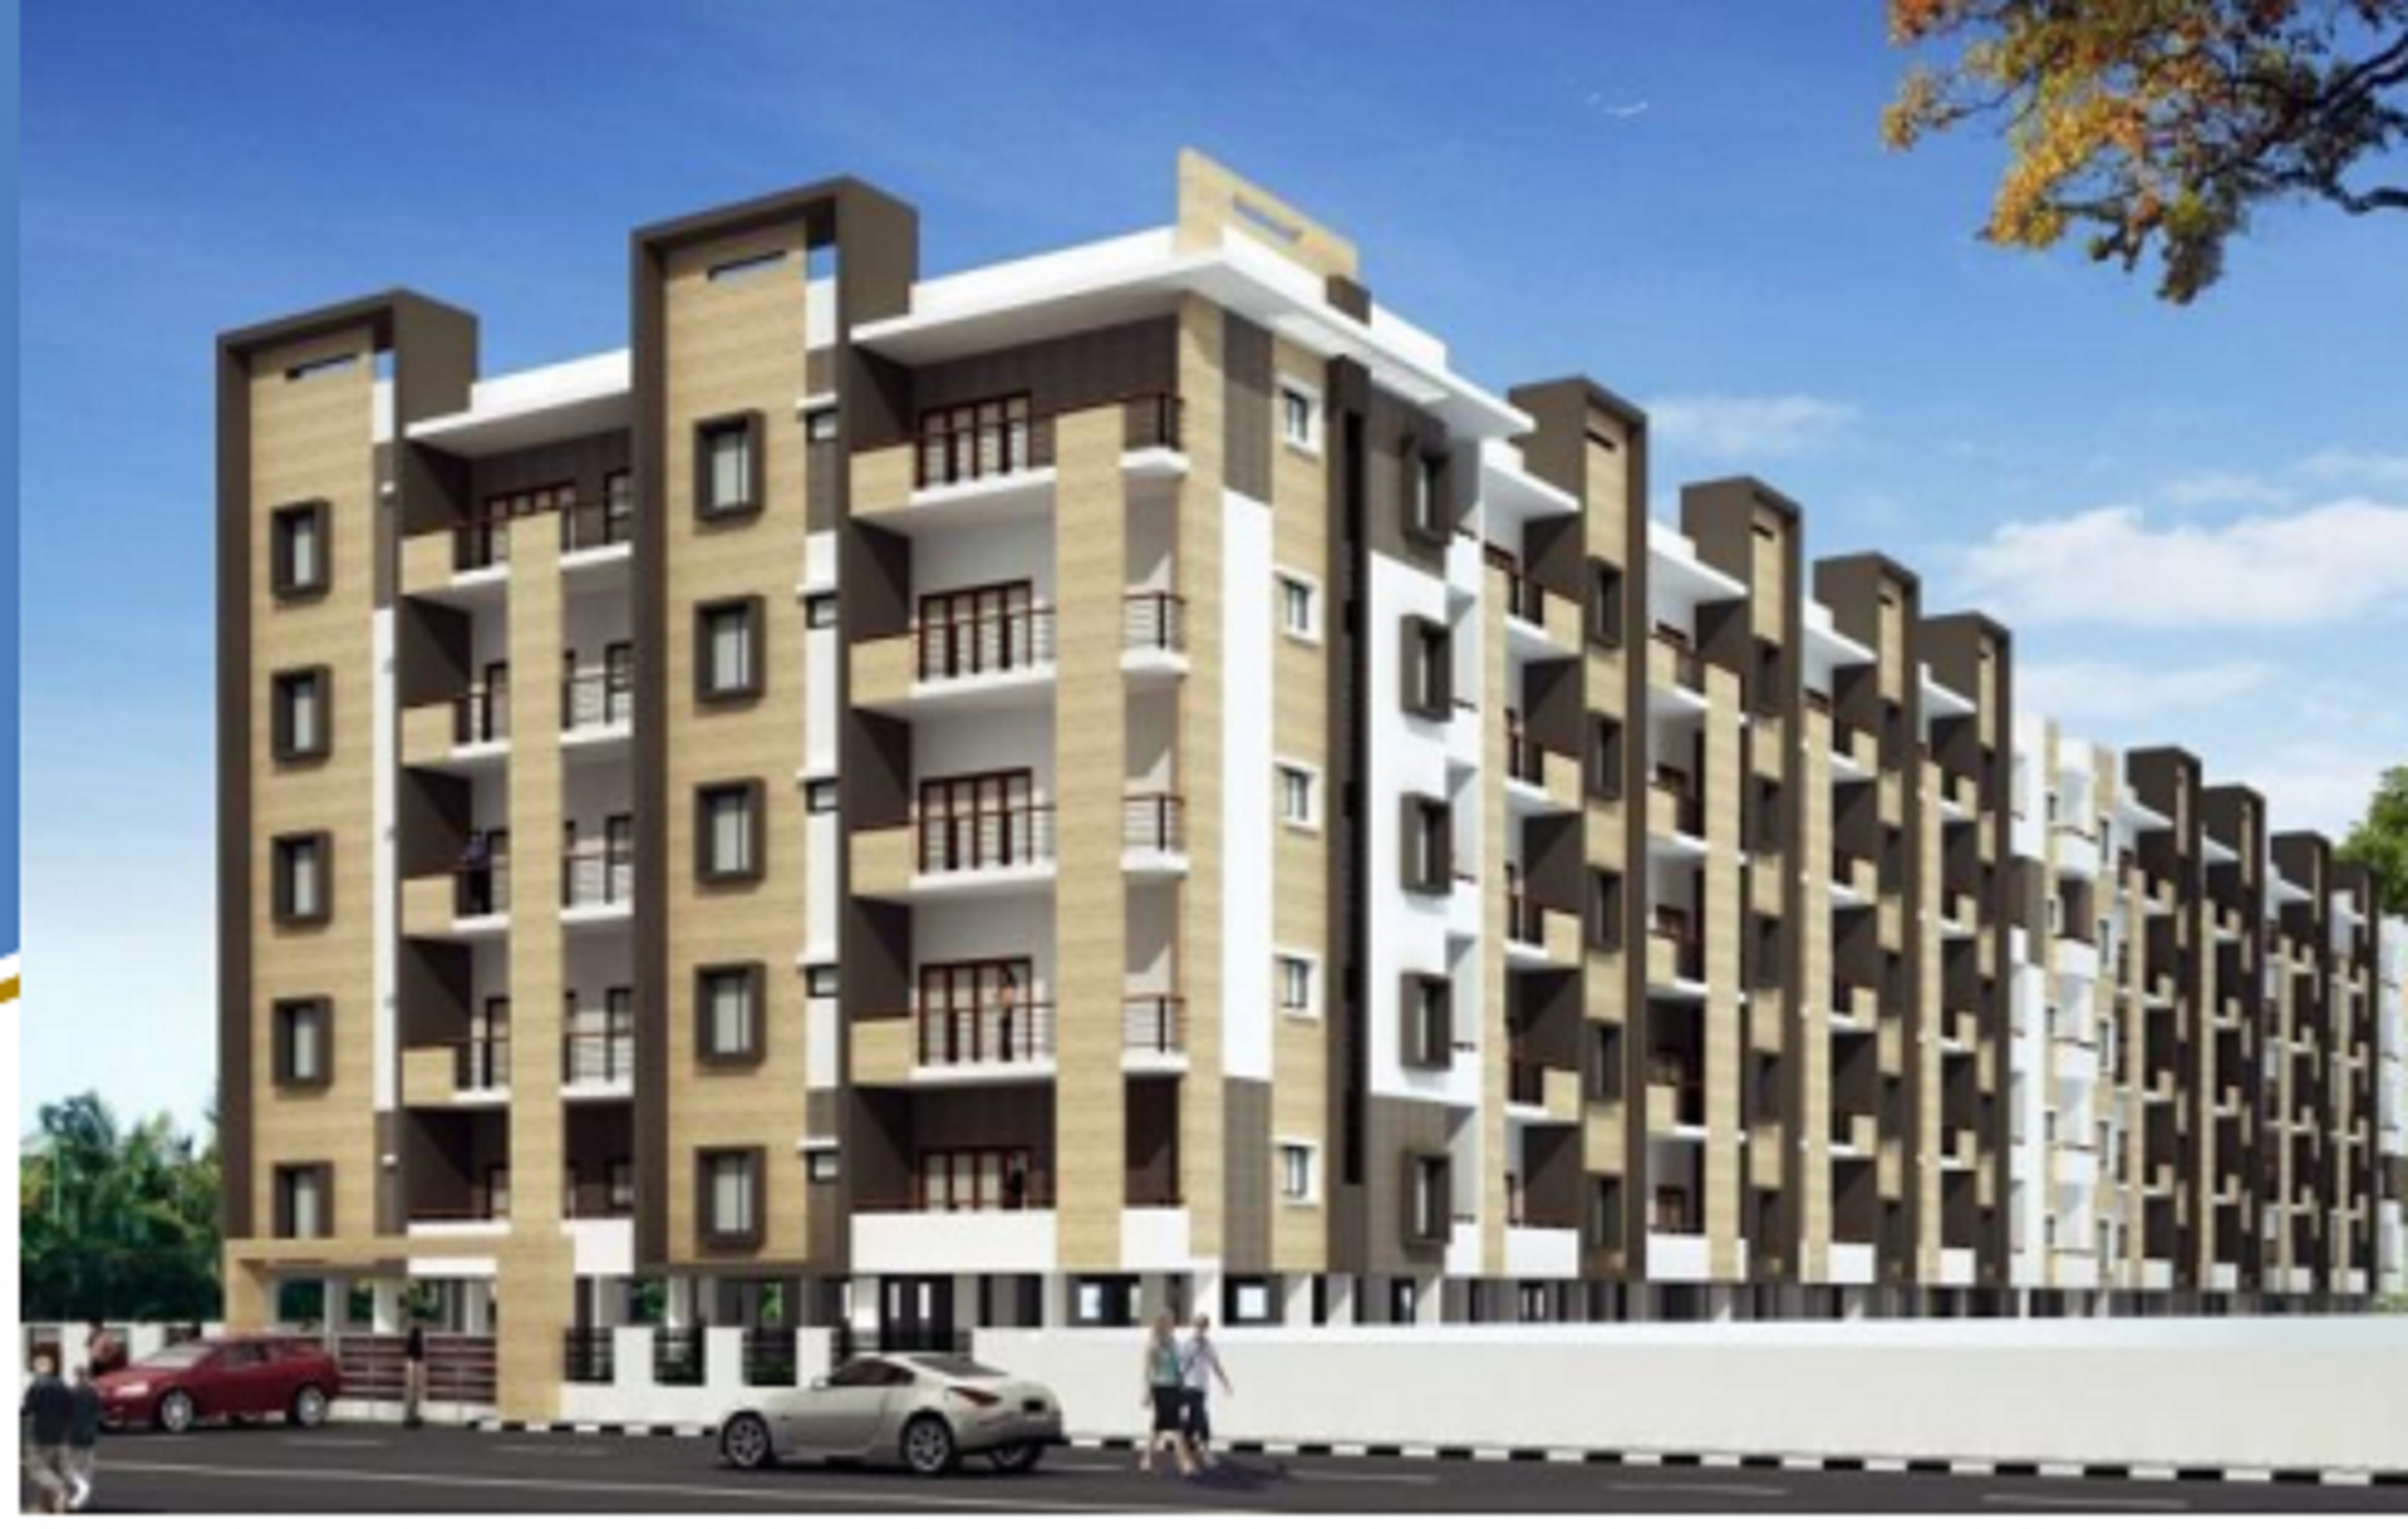 GLADIO: Welcome to 'Gladio', a gated community condo located @ GR Reddy Nagar, Off.Saket, Kapra, offering105 classic 2 & 3 BHK apartments, loaded with ...